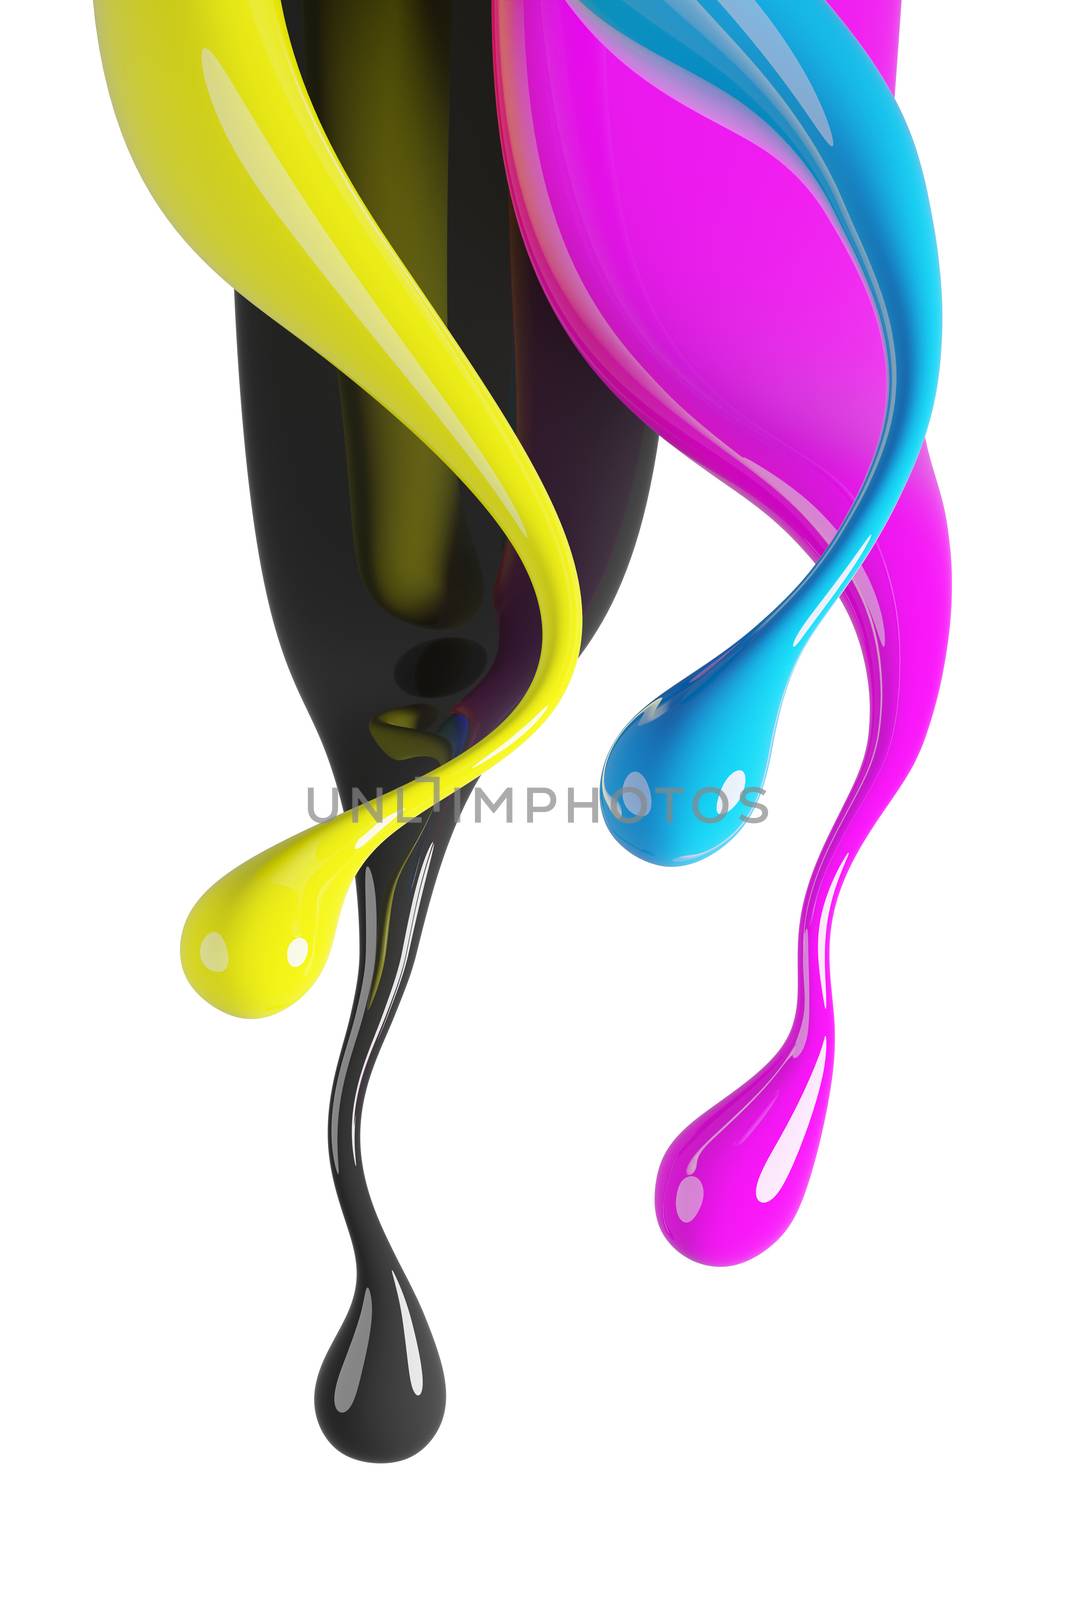 CMYK color splash isolated on white background 3d render by Myimagine